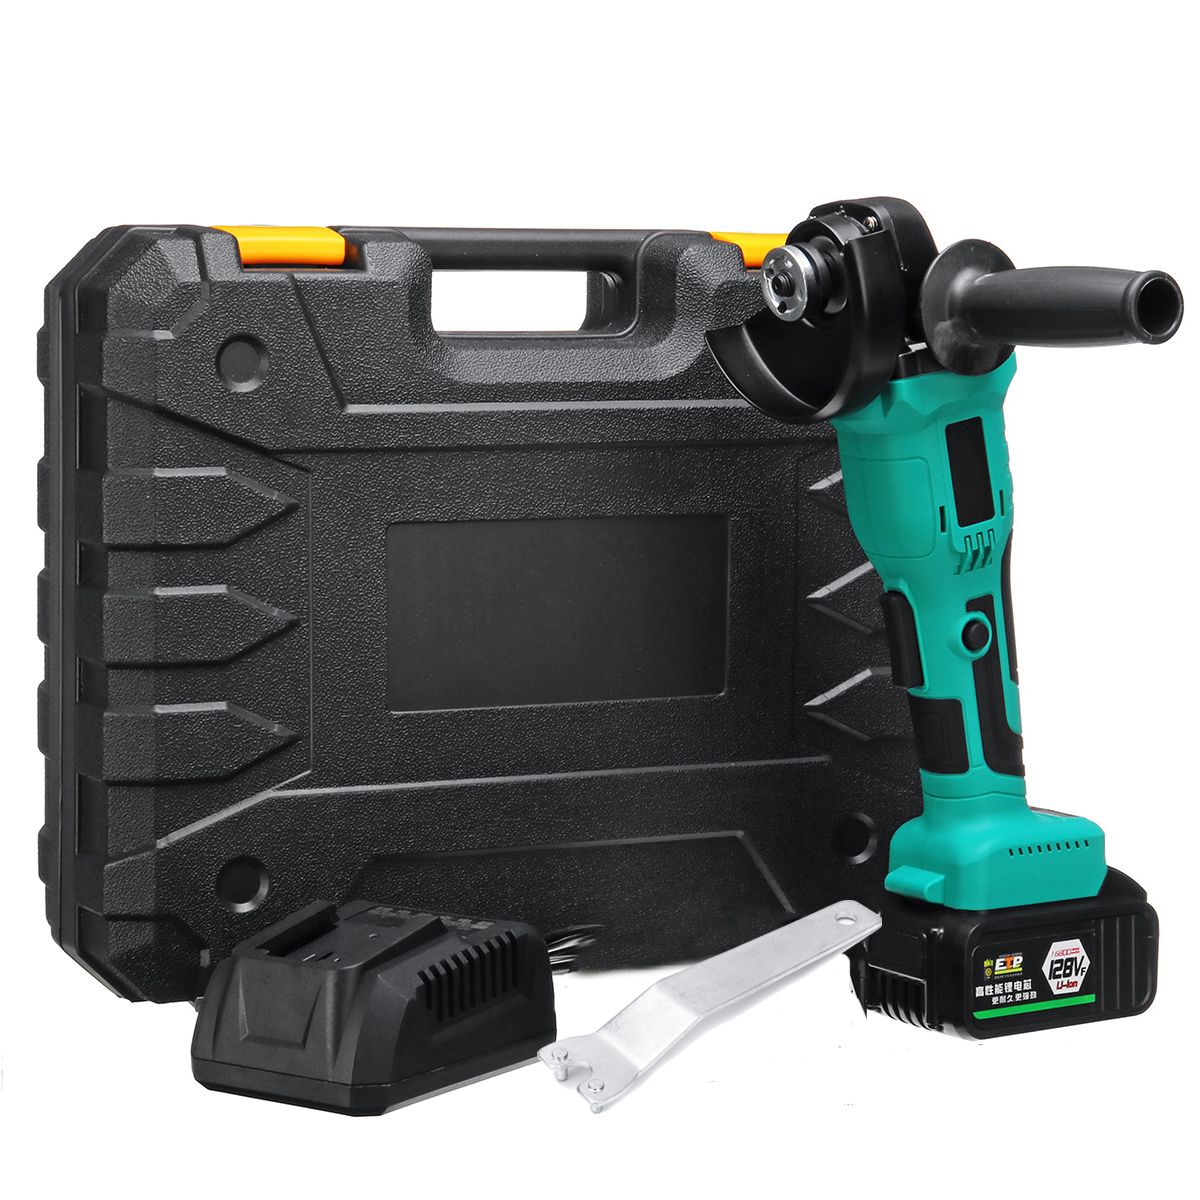 128VF-1300W-10000RPM-Cordless-Brushless-Angle-Grinder-with-16800mAh-Li-Ion-Battery-1520444